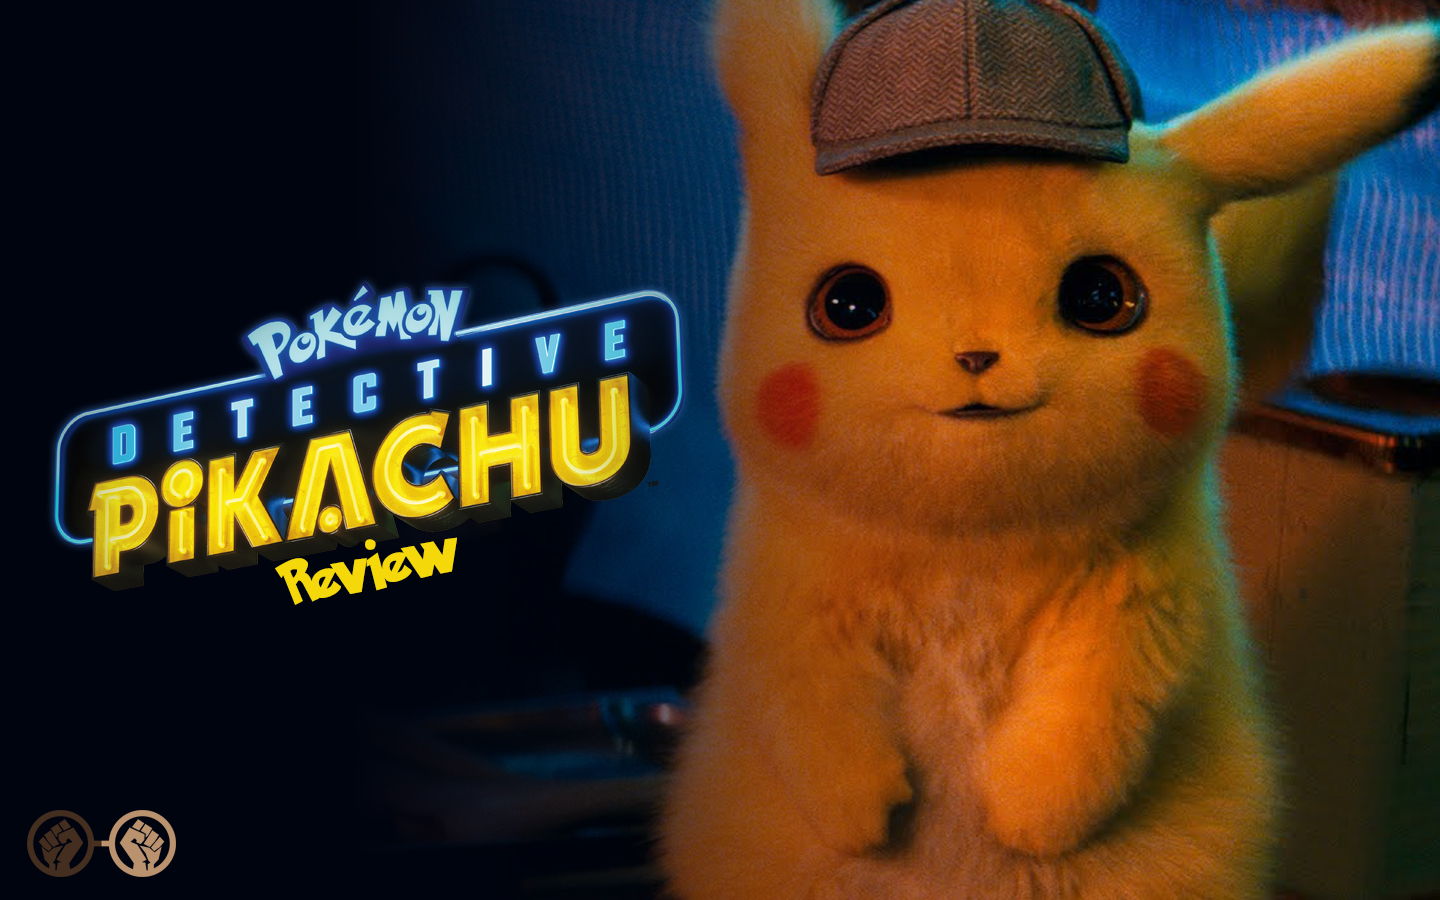 ‘Detective Pikachu’ Is A Fun-Filled Mystery With The Pokemon We Know And Love – Review